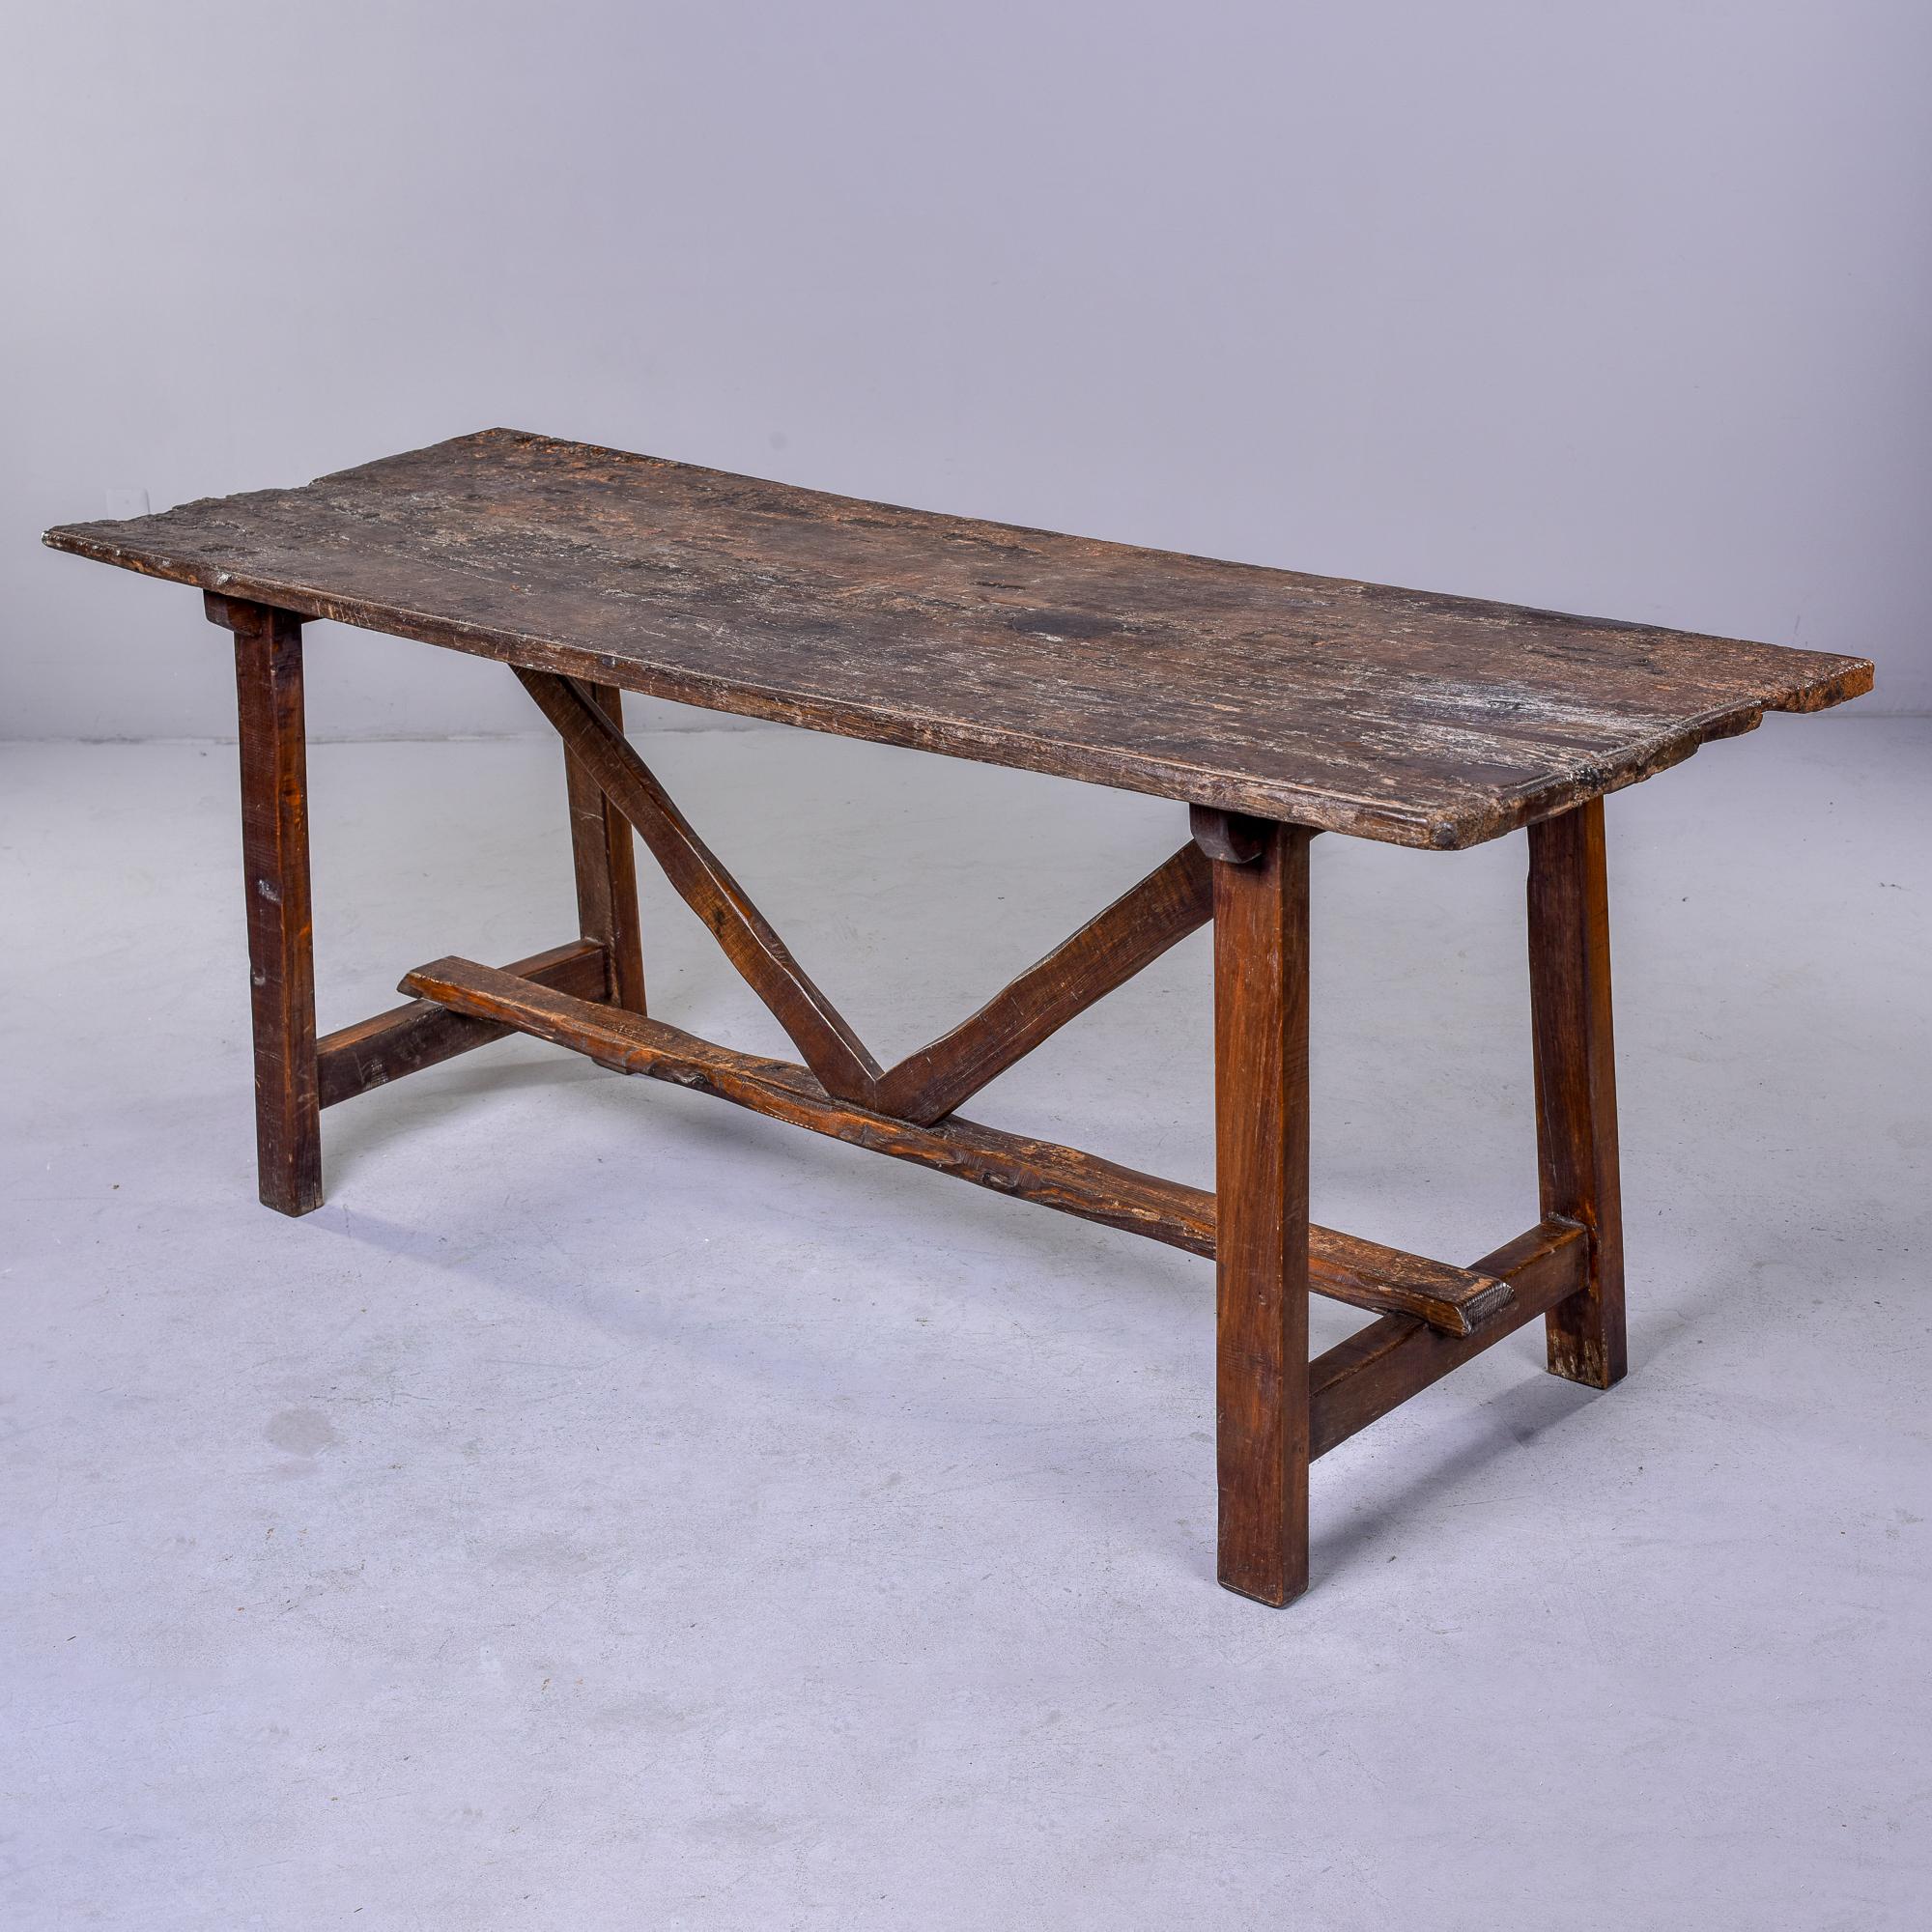 Circa 1840s dark oak trestle table found in Italy. Simple, primitive styling with four legs, a center stretcher and V-form supports. Wood surfaces show a lot of honest wear, patina and texture. See detail photos. Table is structurally sound.